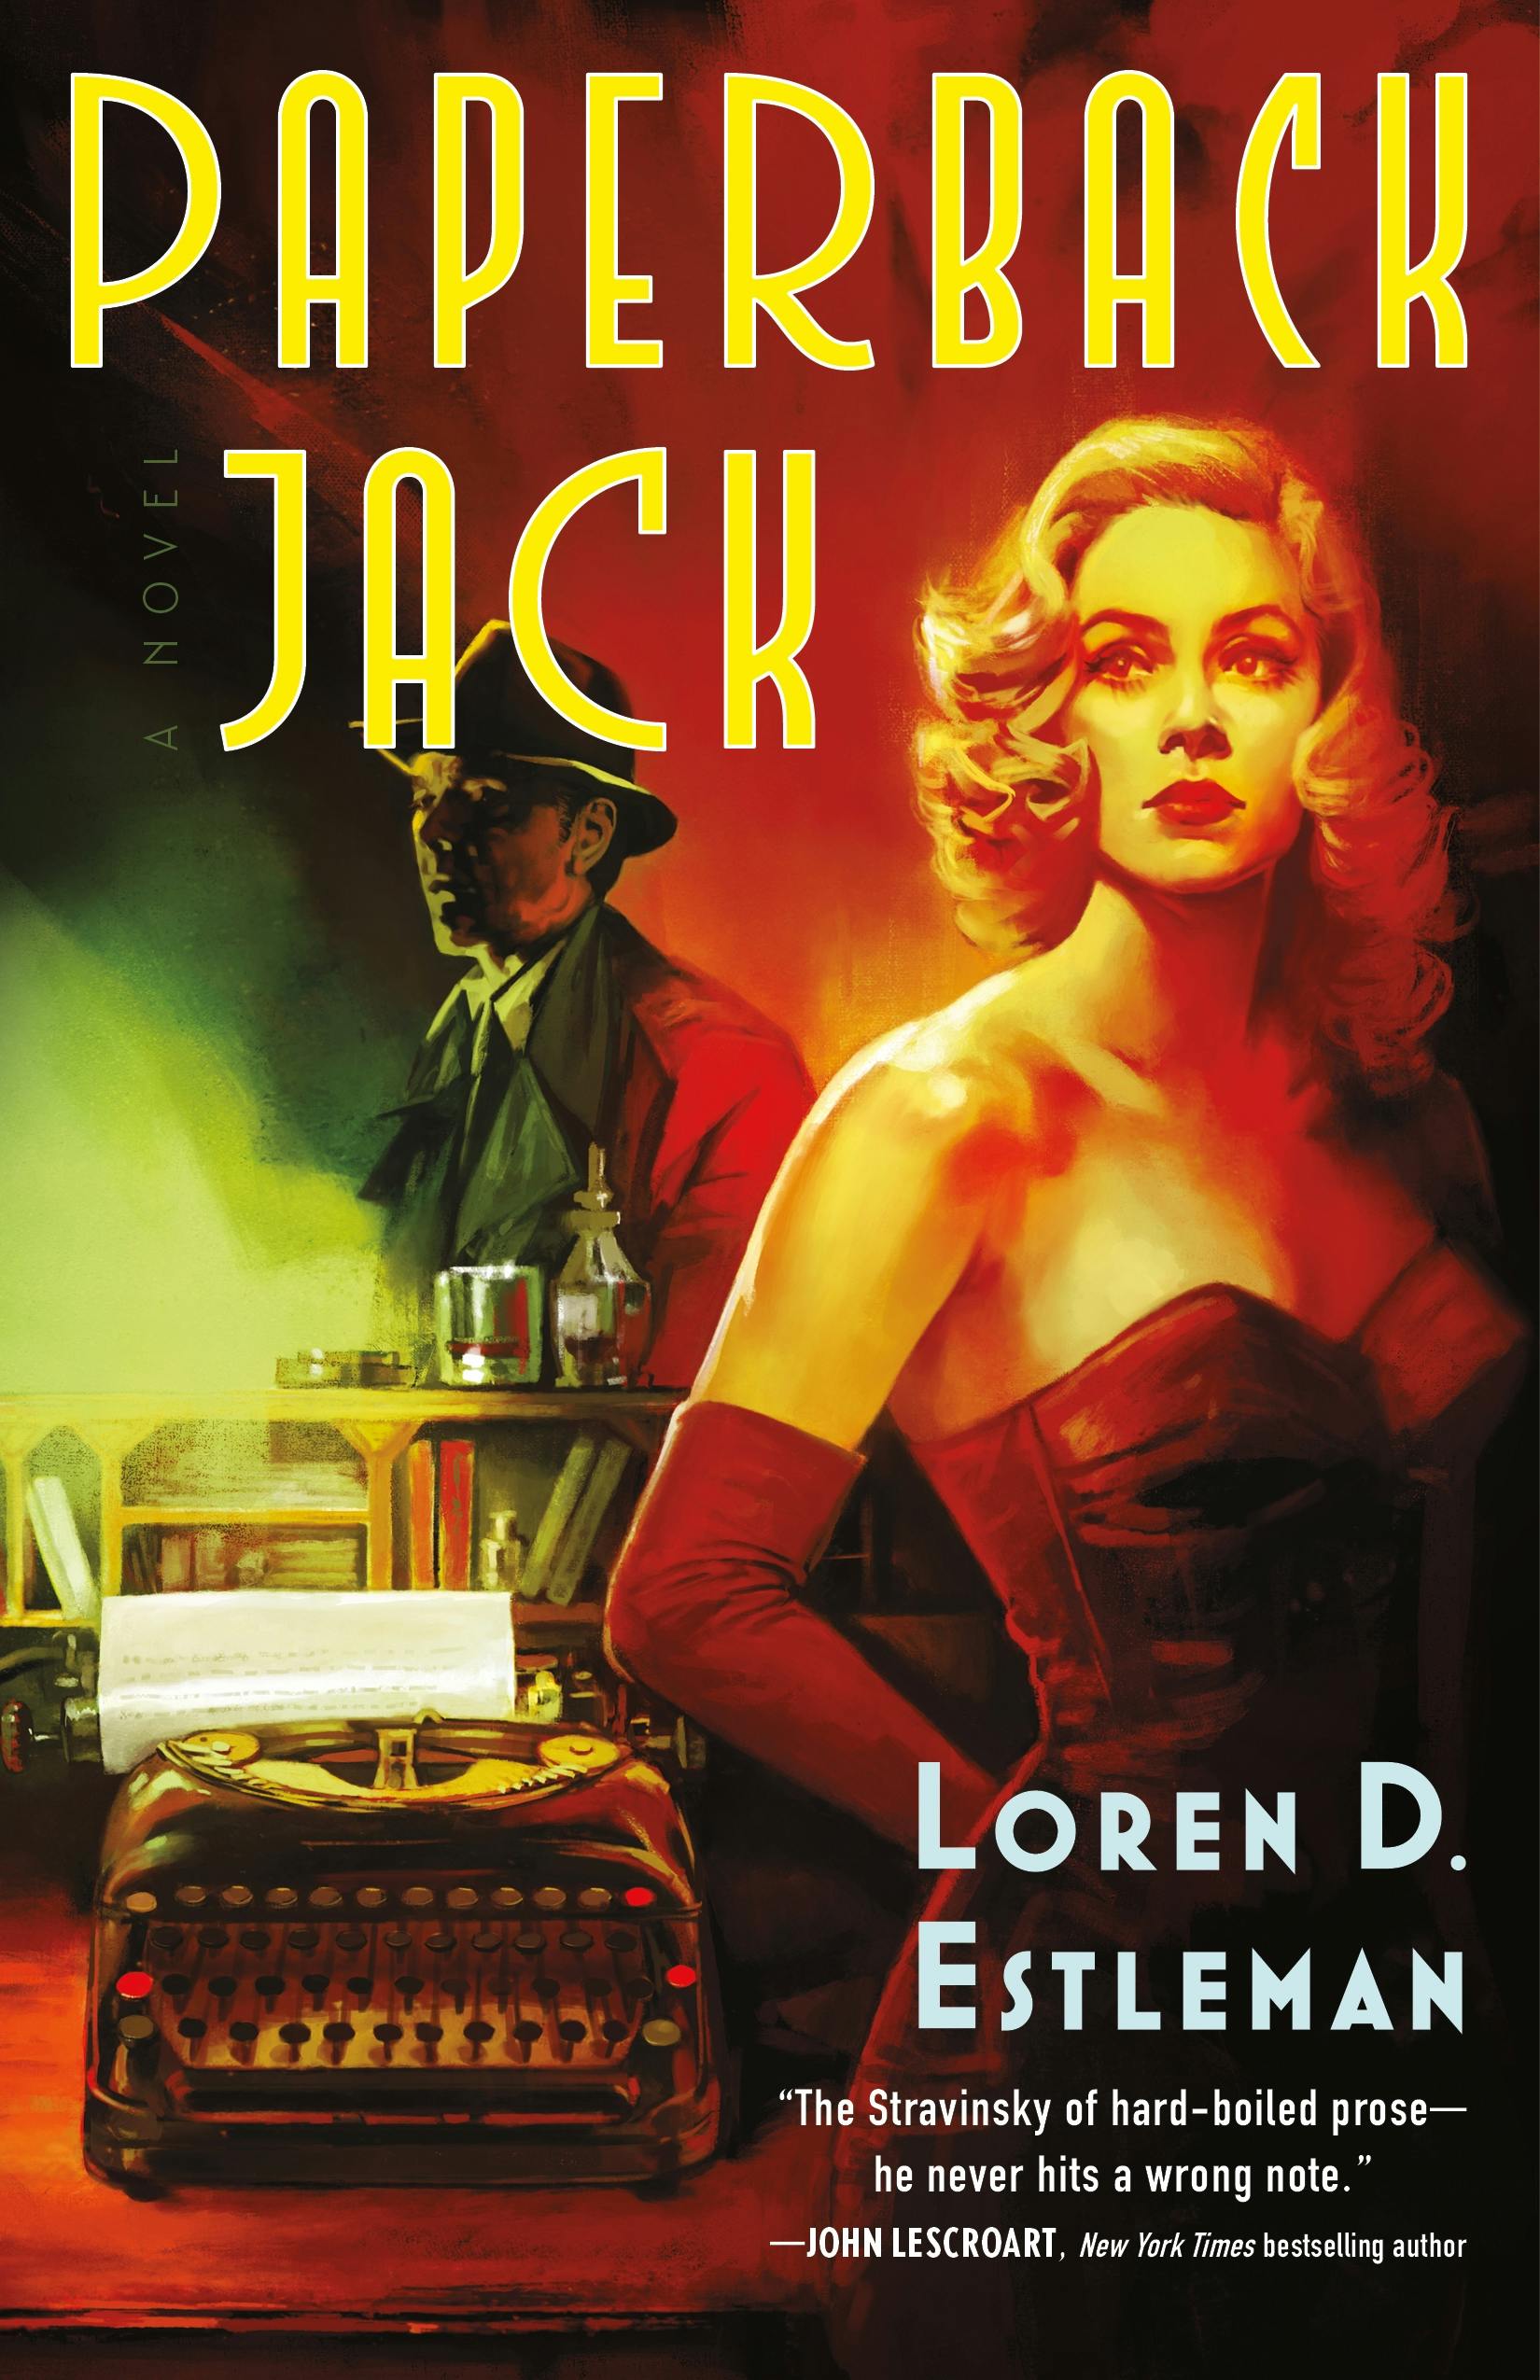 Cover for the book titled as: Paperback Jack